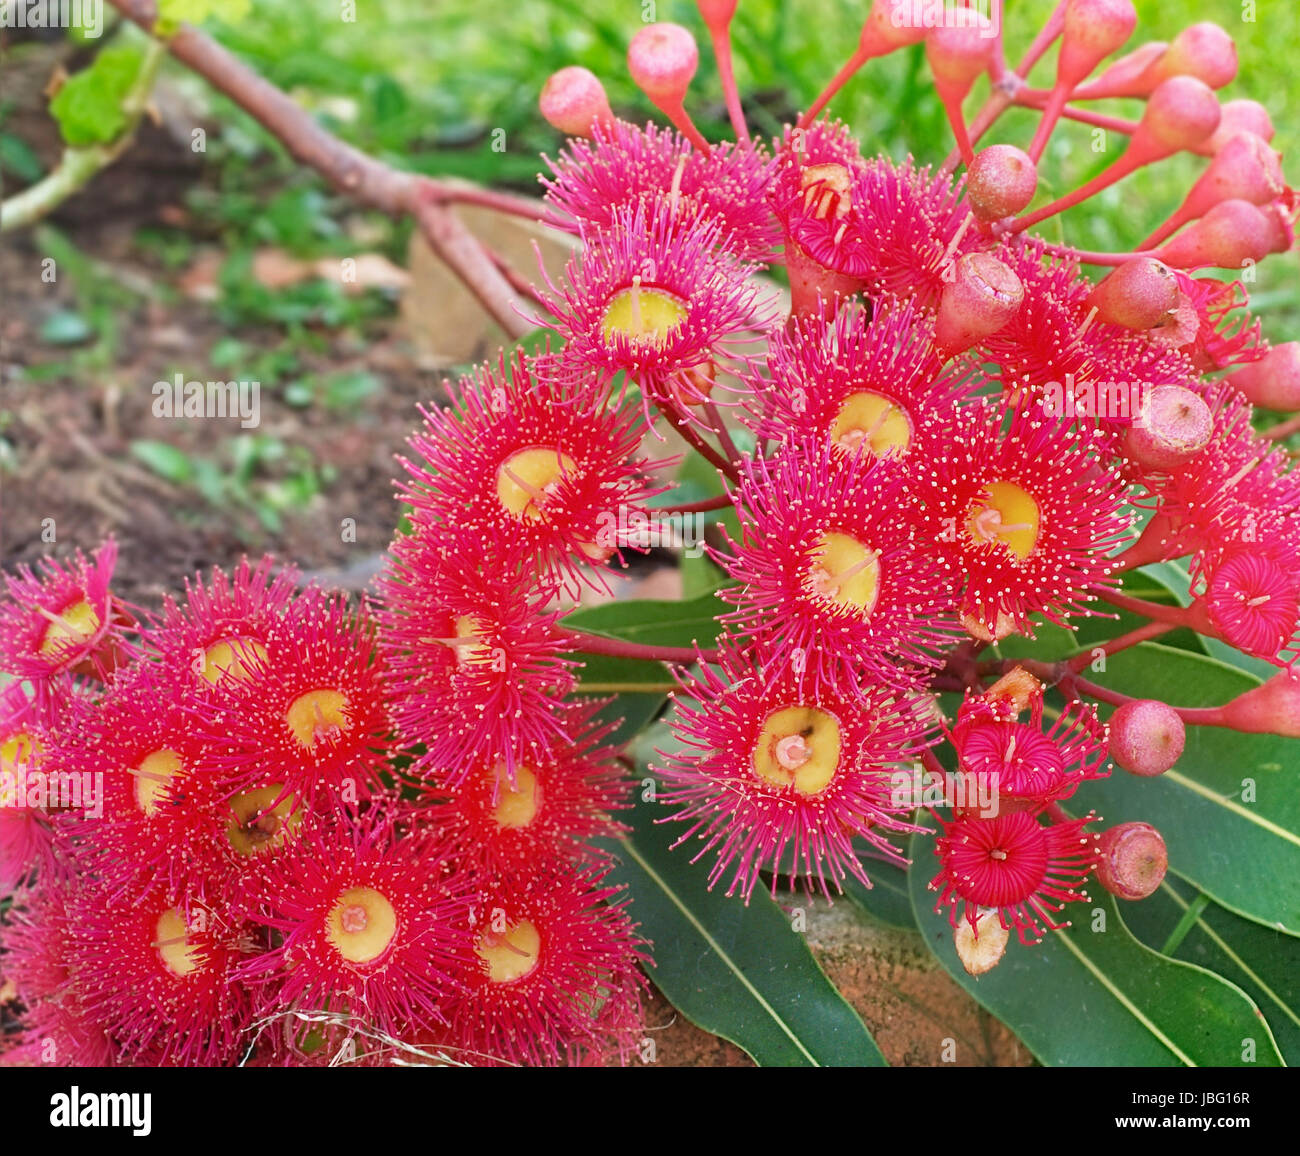 Corymbia pytochocarpa, Australian native plants, red flowering eucalyptus gum tree, red flowers yellow centres and green leaf foliage Stock Photo